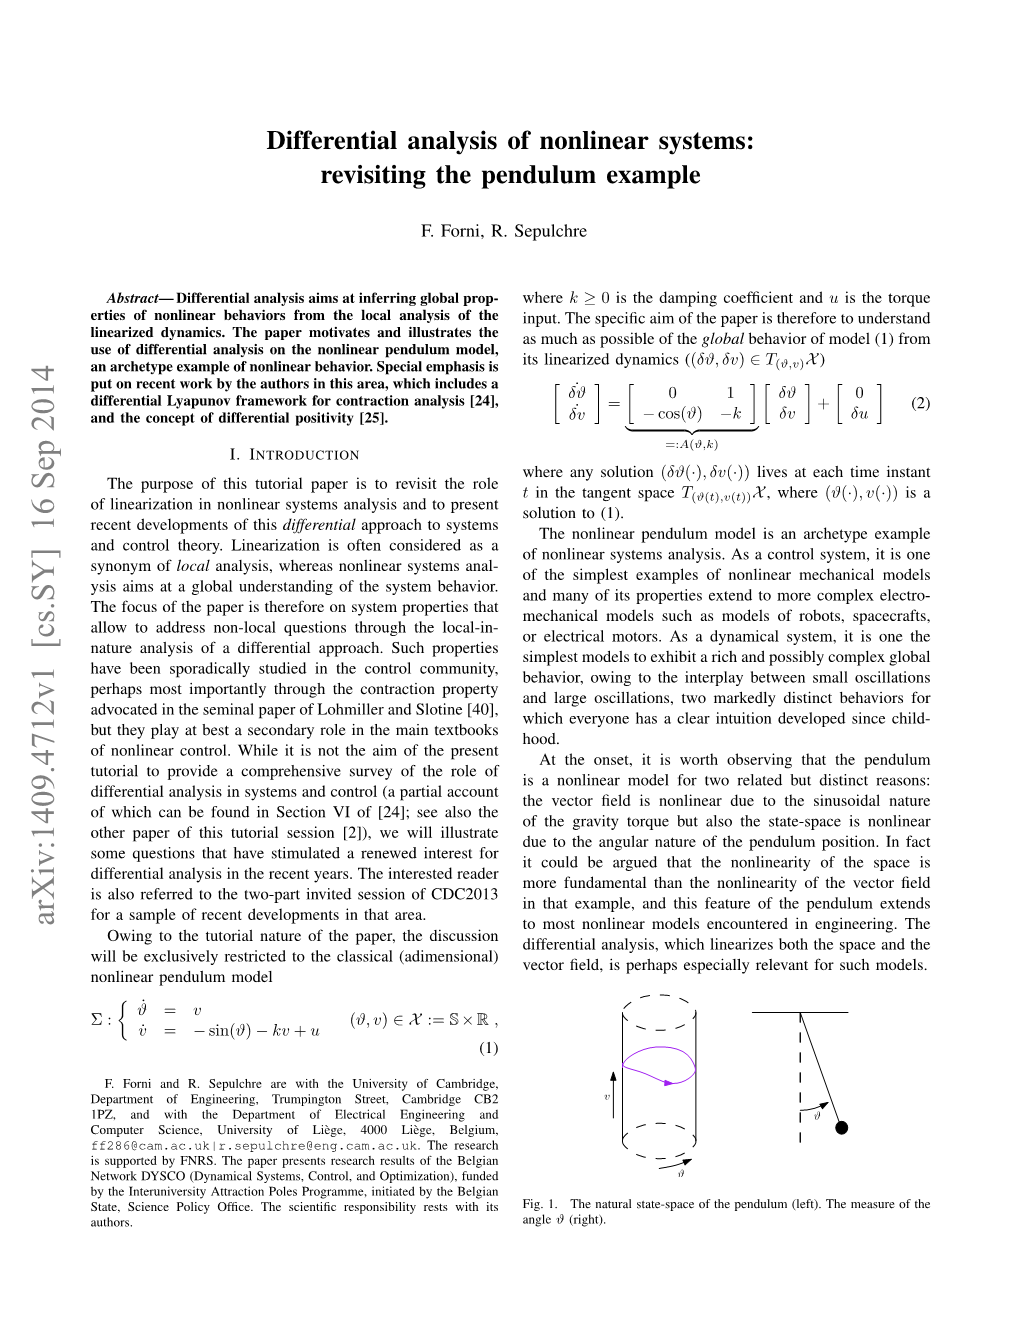 Differential Analysis of Nonlinear Systems: Revisiting the Pendulum Example